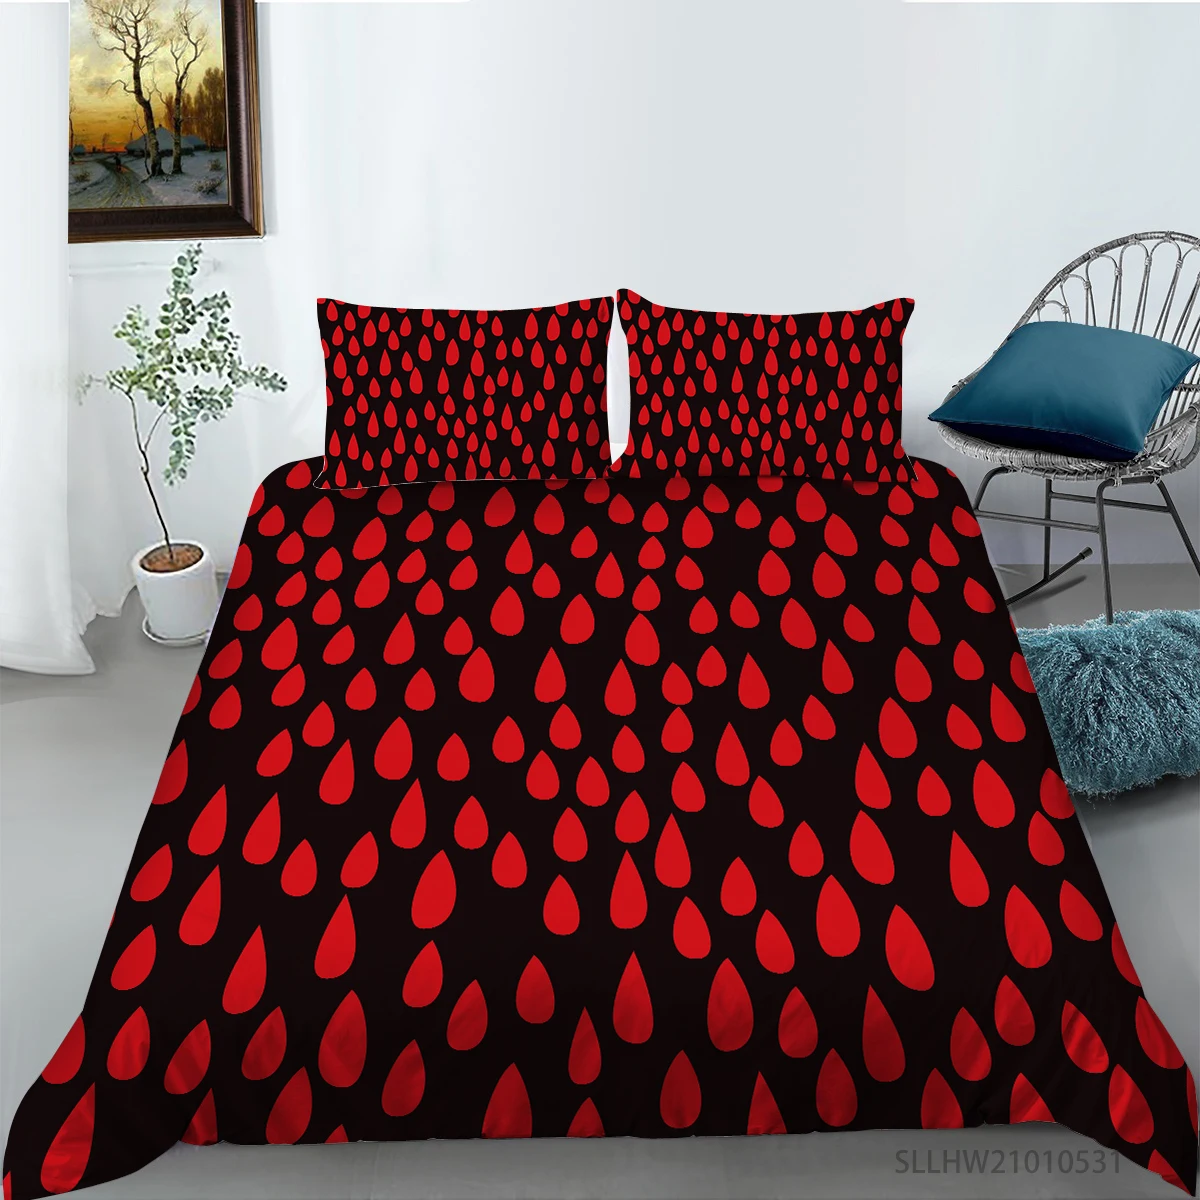 

3D Red Polka Dot Pattern Printing Bedding set Quilt cover with pillowcases Bedclothes 2/3pcs Single Double Queen King sizes